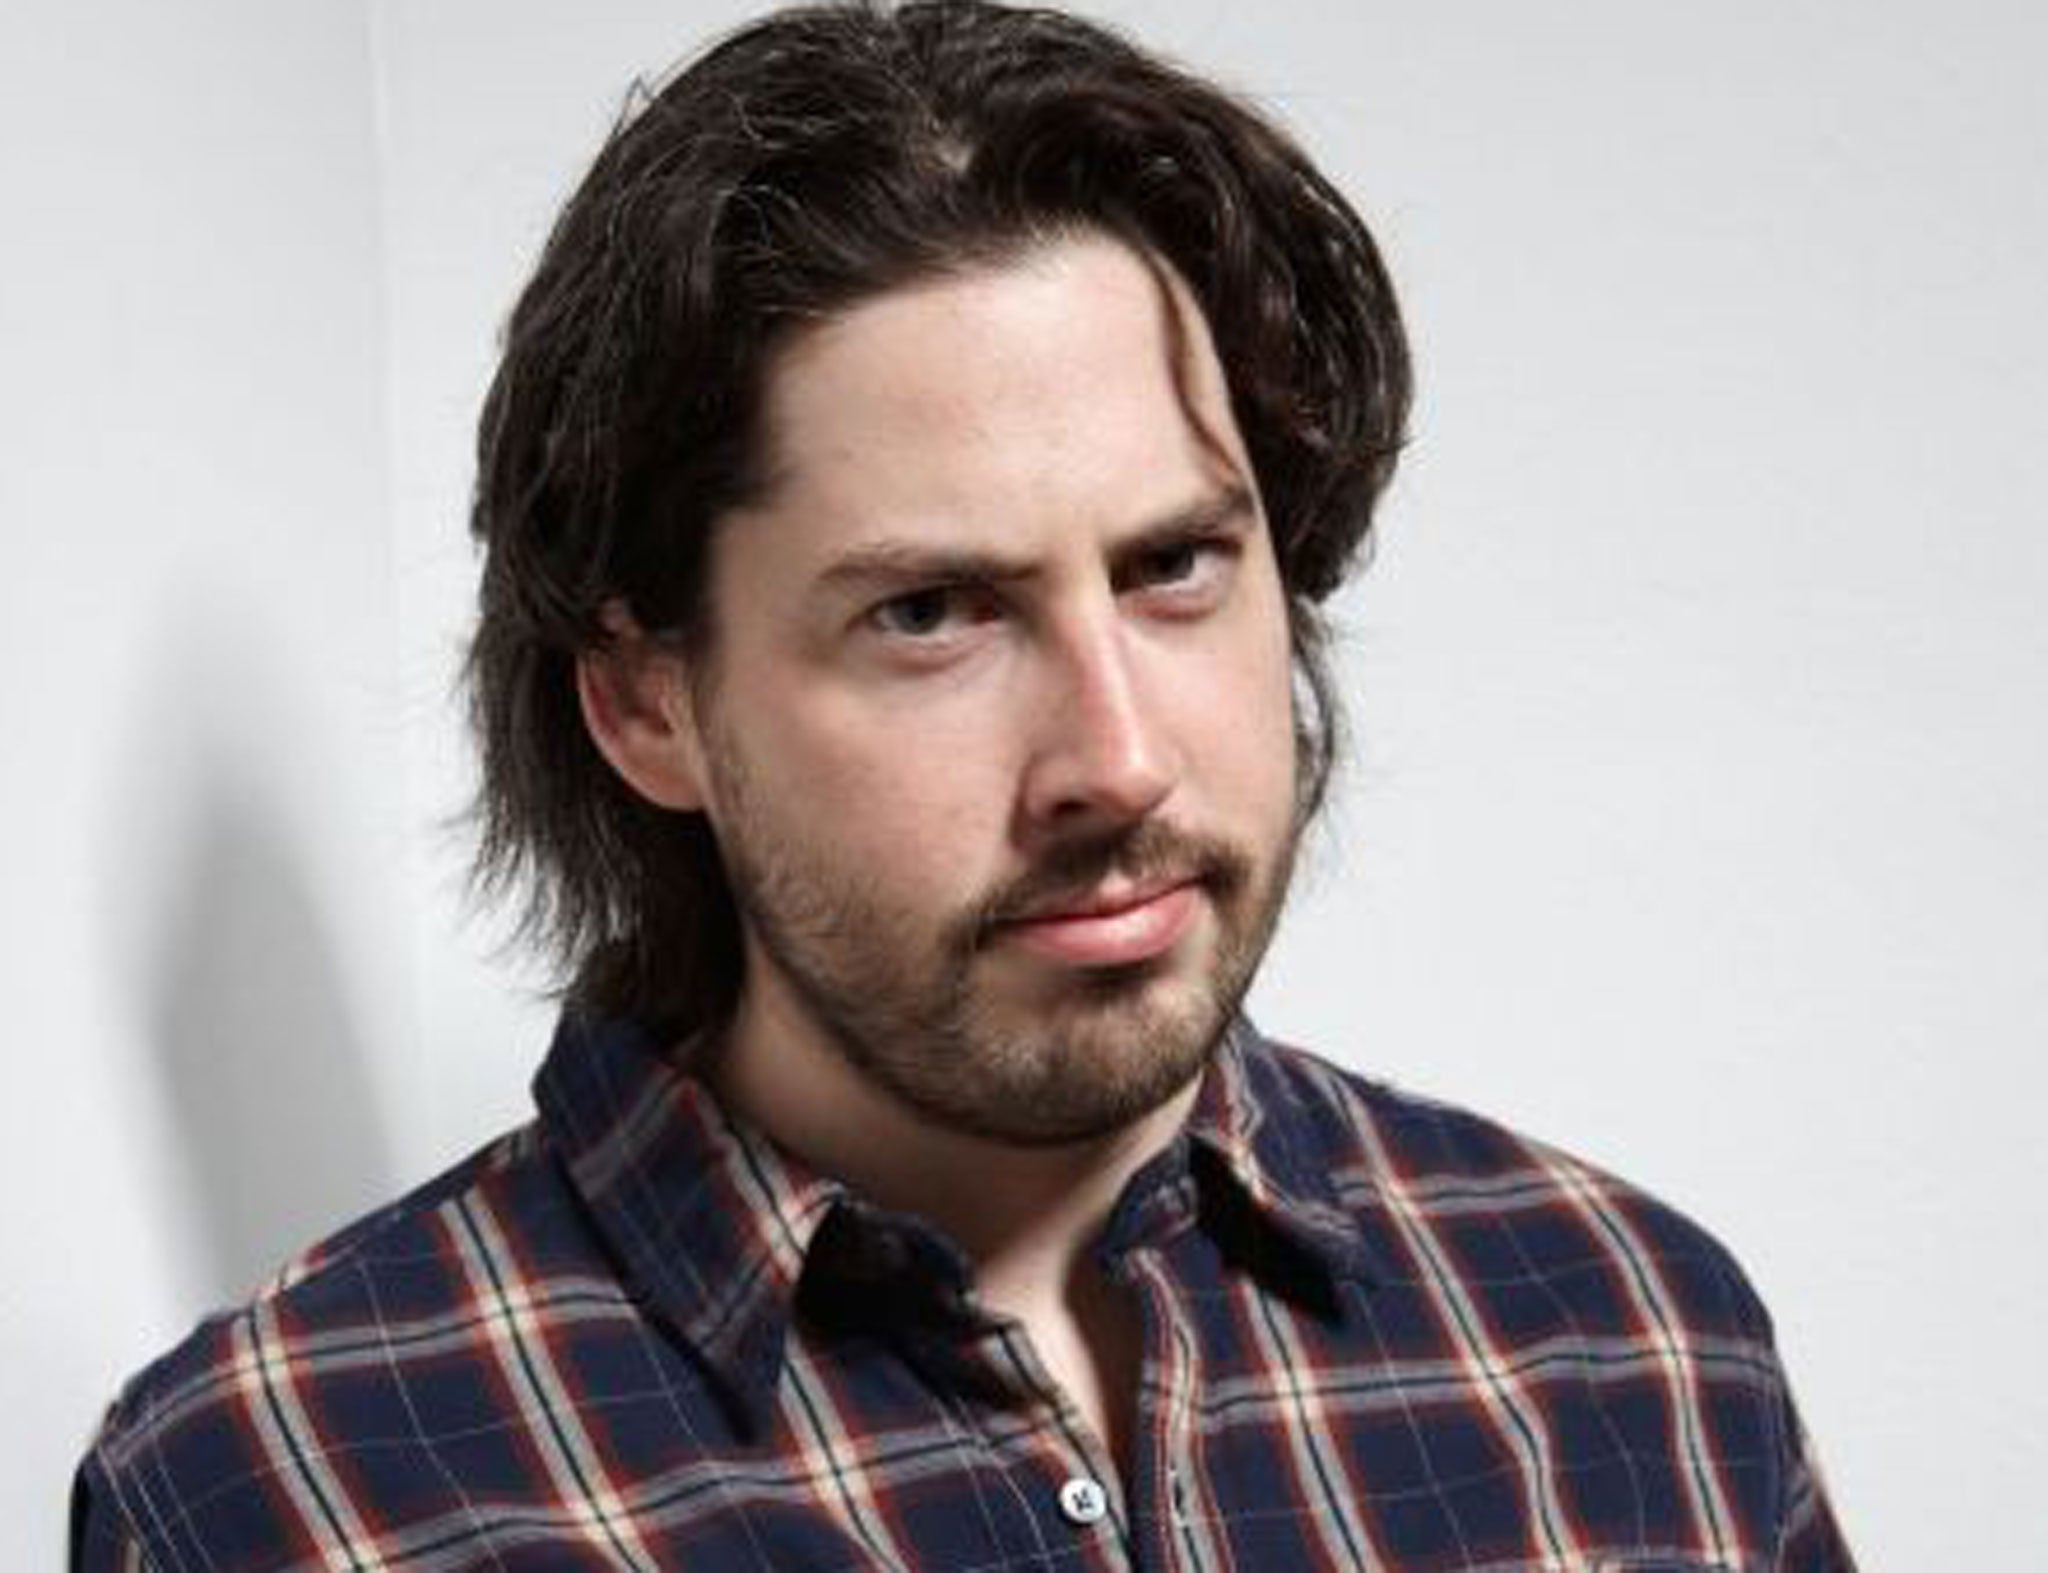 Jason Reitman is putting together his next directing project